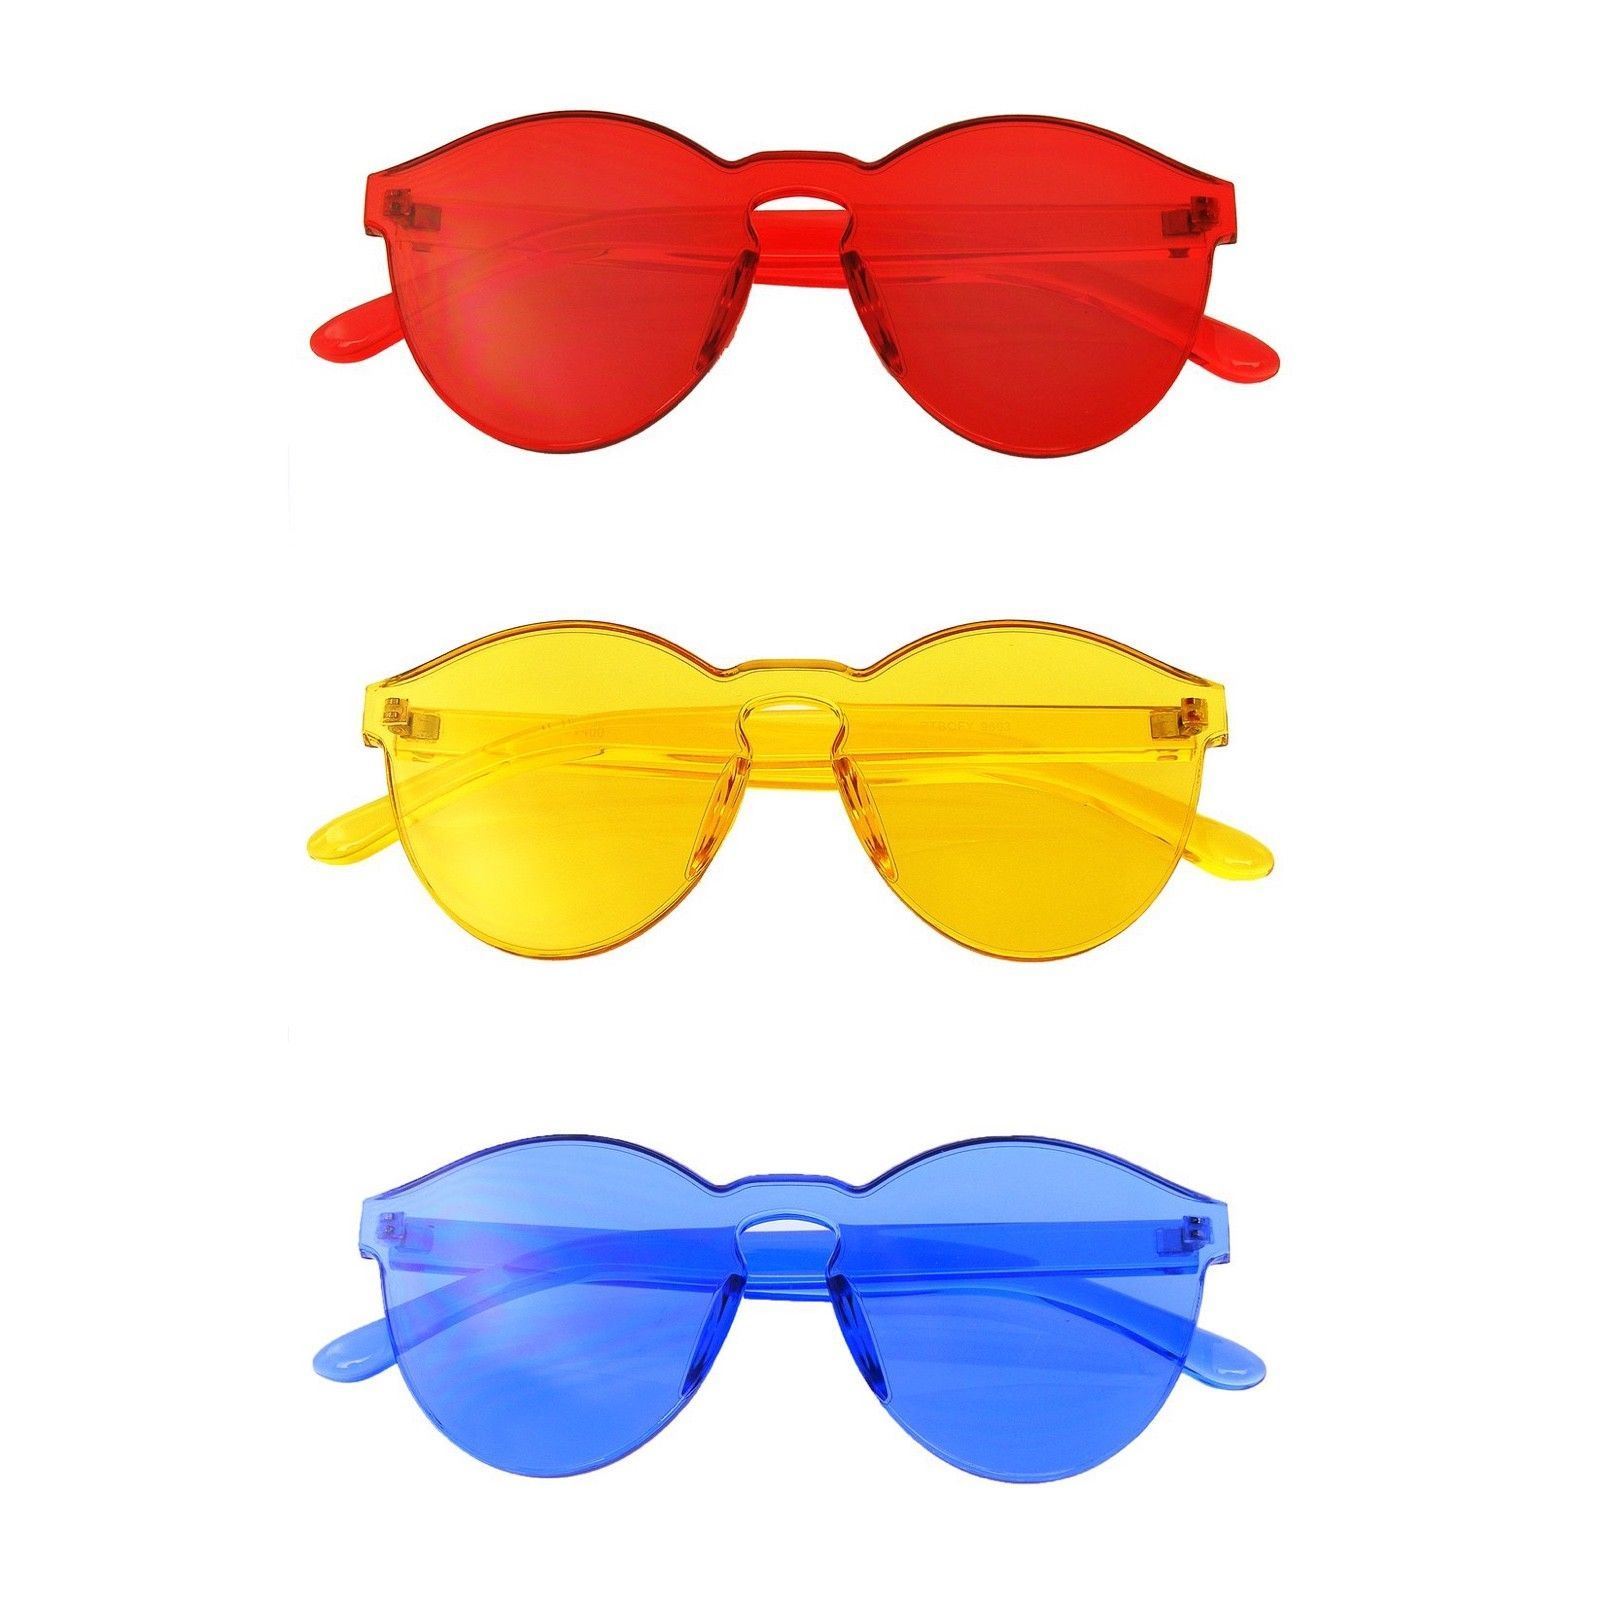 Bundle Of Sunglasses In A Bundles 3 Pairs of Red Mens Womens Sun Glasses EE01